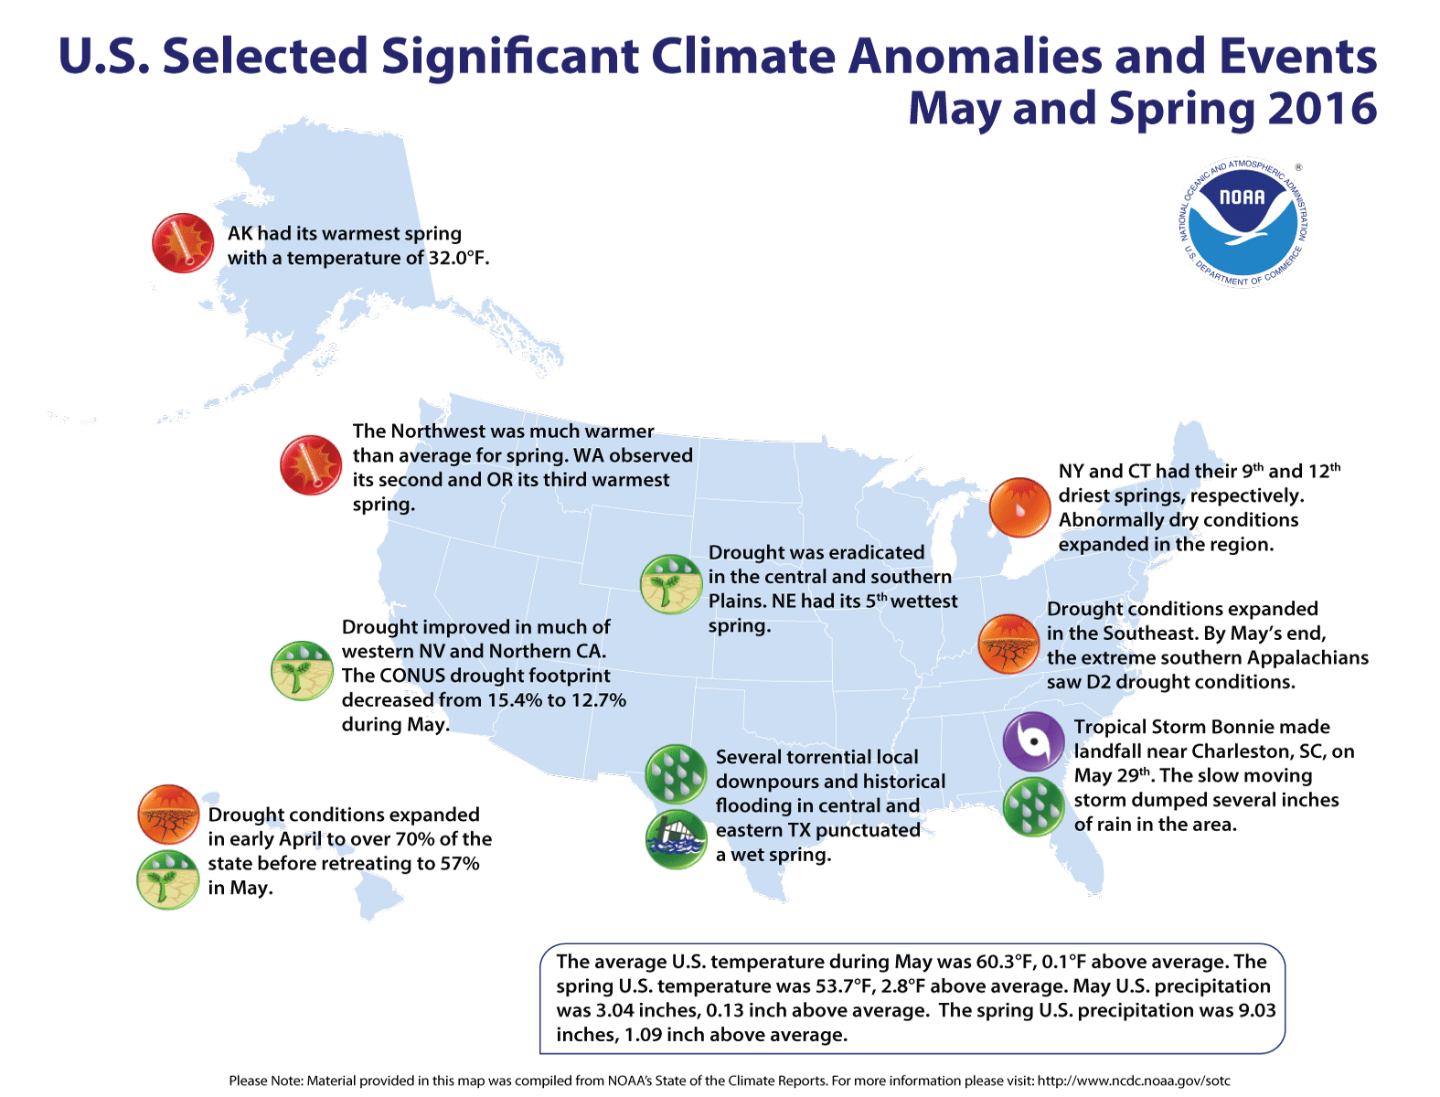 Notable climate events for spring and May 2016